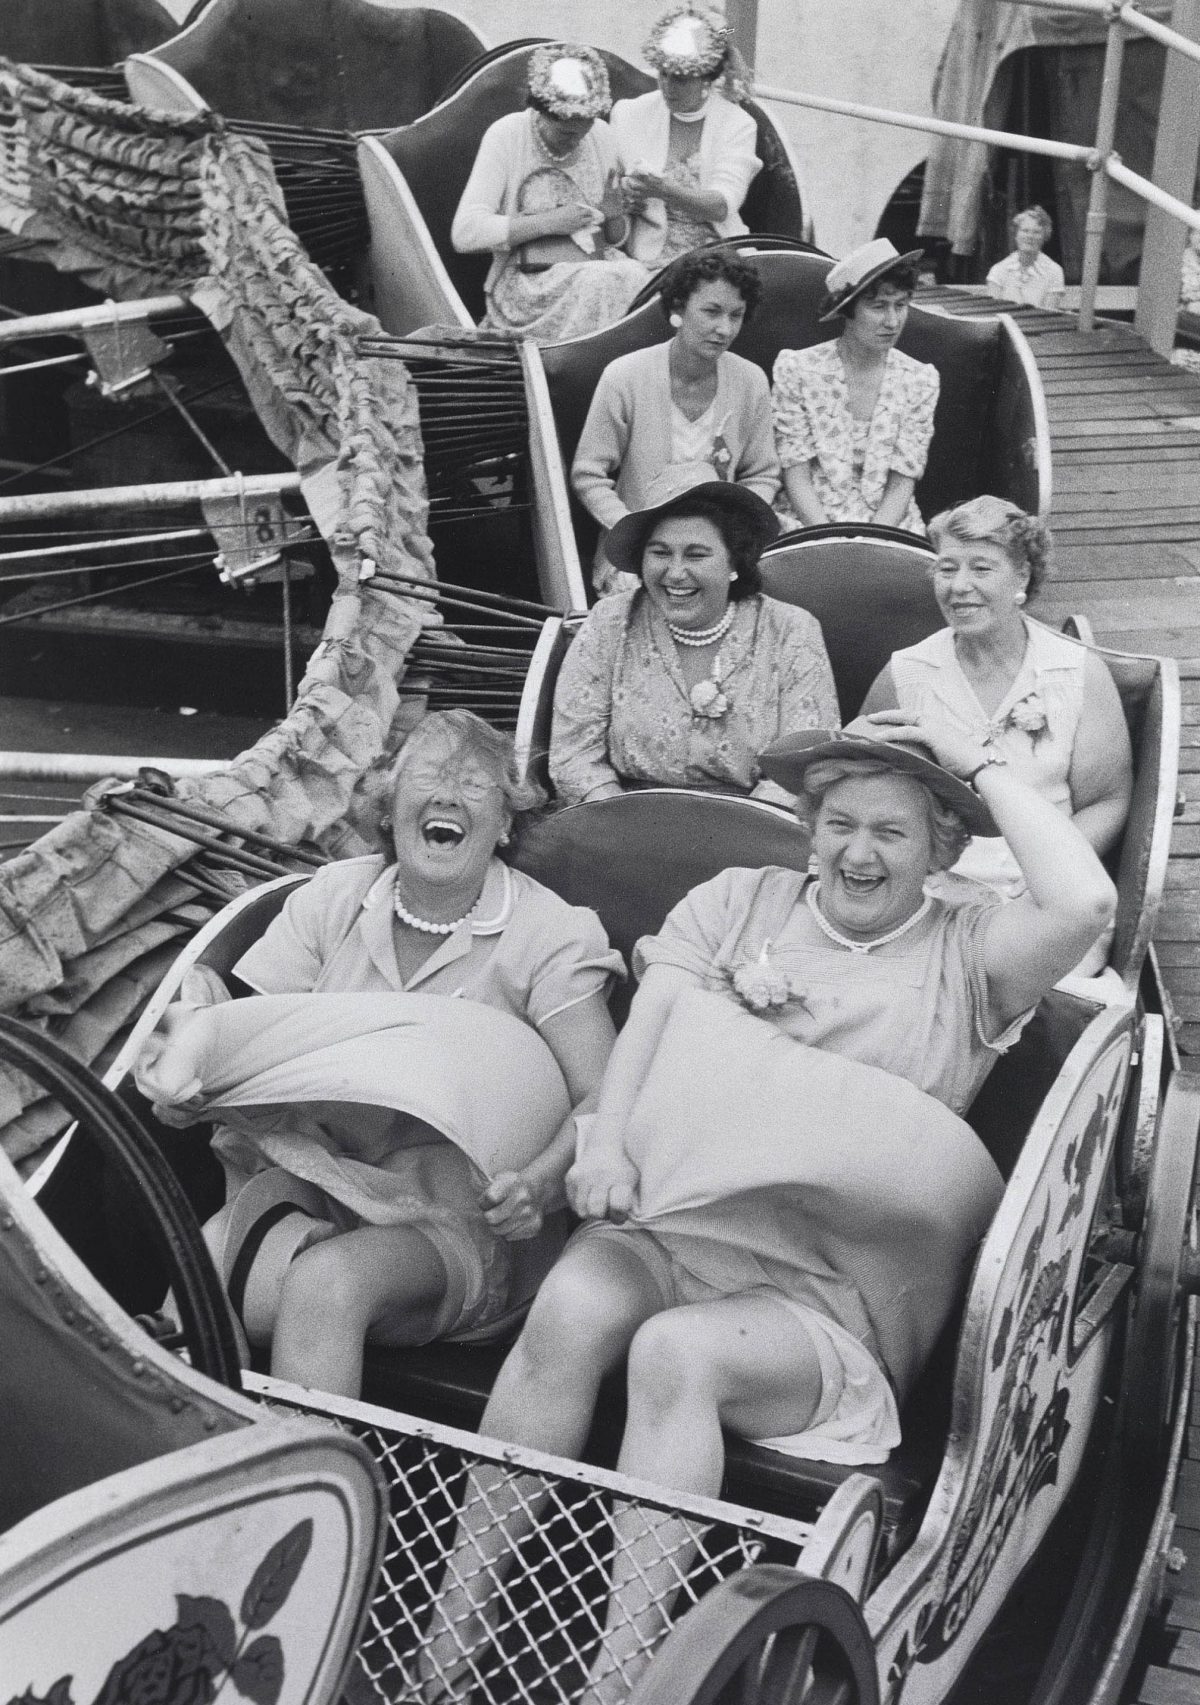 Women from clapham London in Margate 1950s